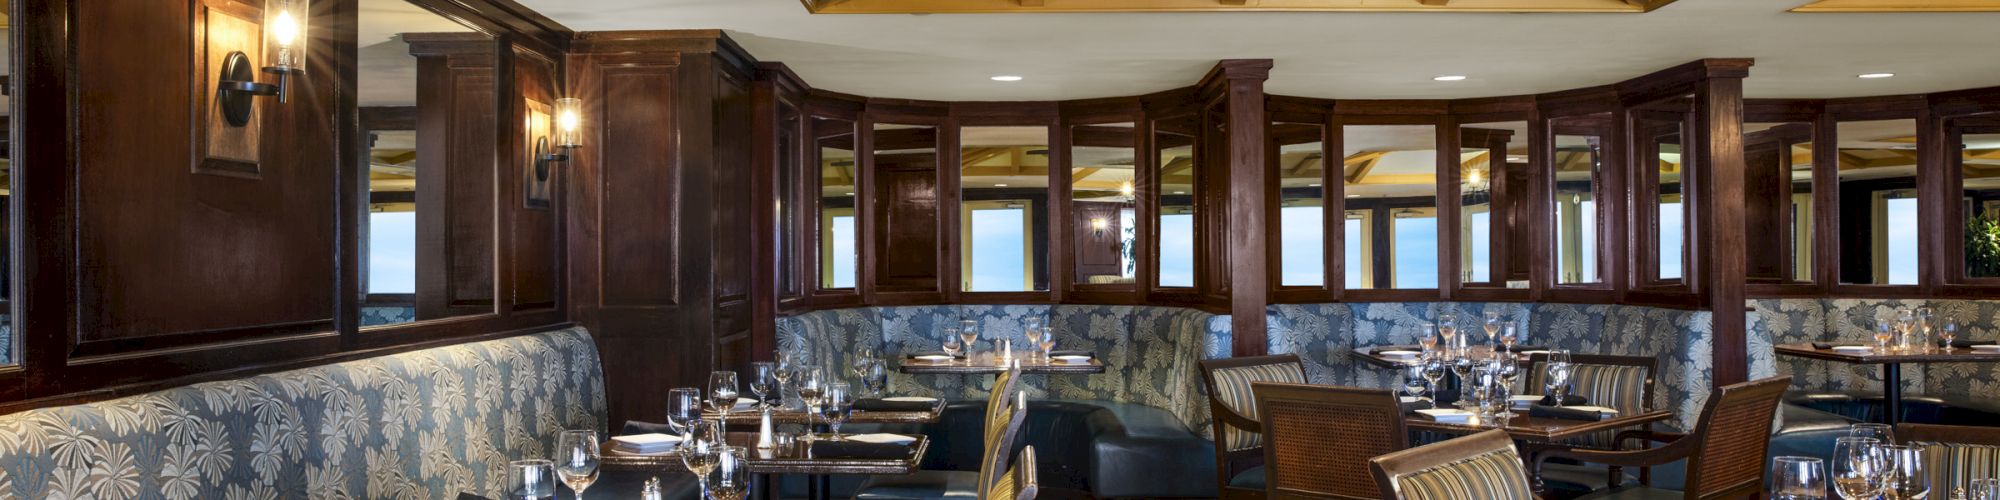 The image shows an elegant restaurant interior with wooden furnishings, cushioned seating, neatly arranged tables, and a ceiling fan.